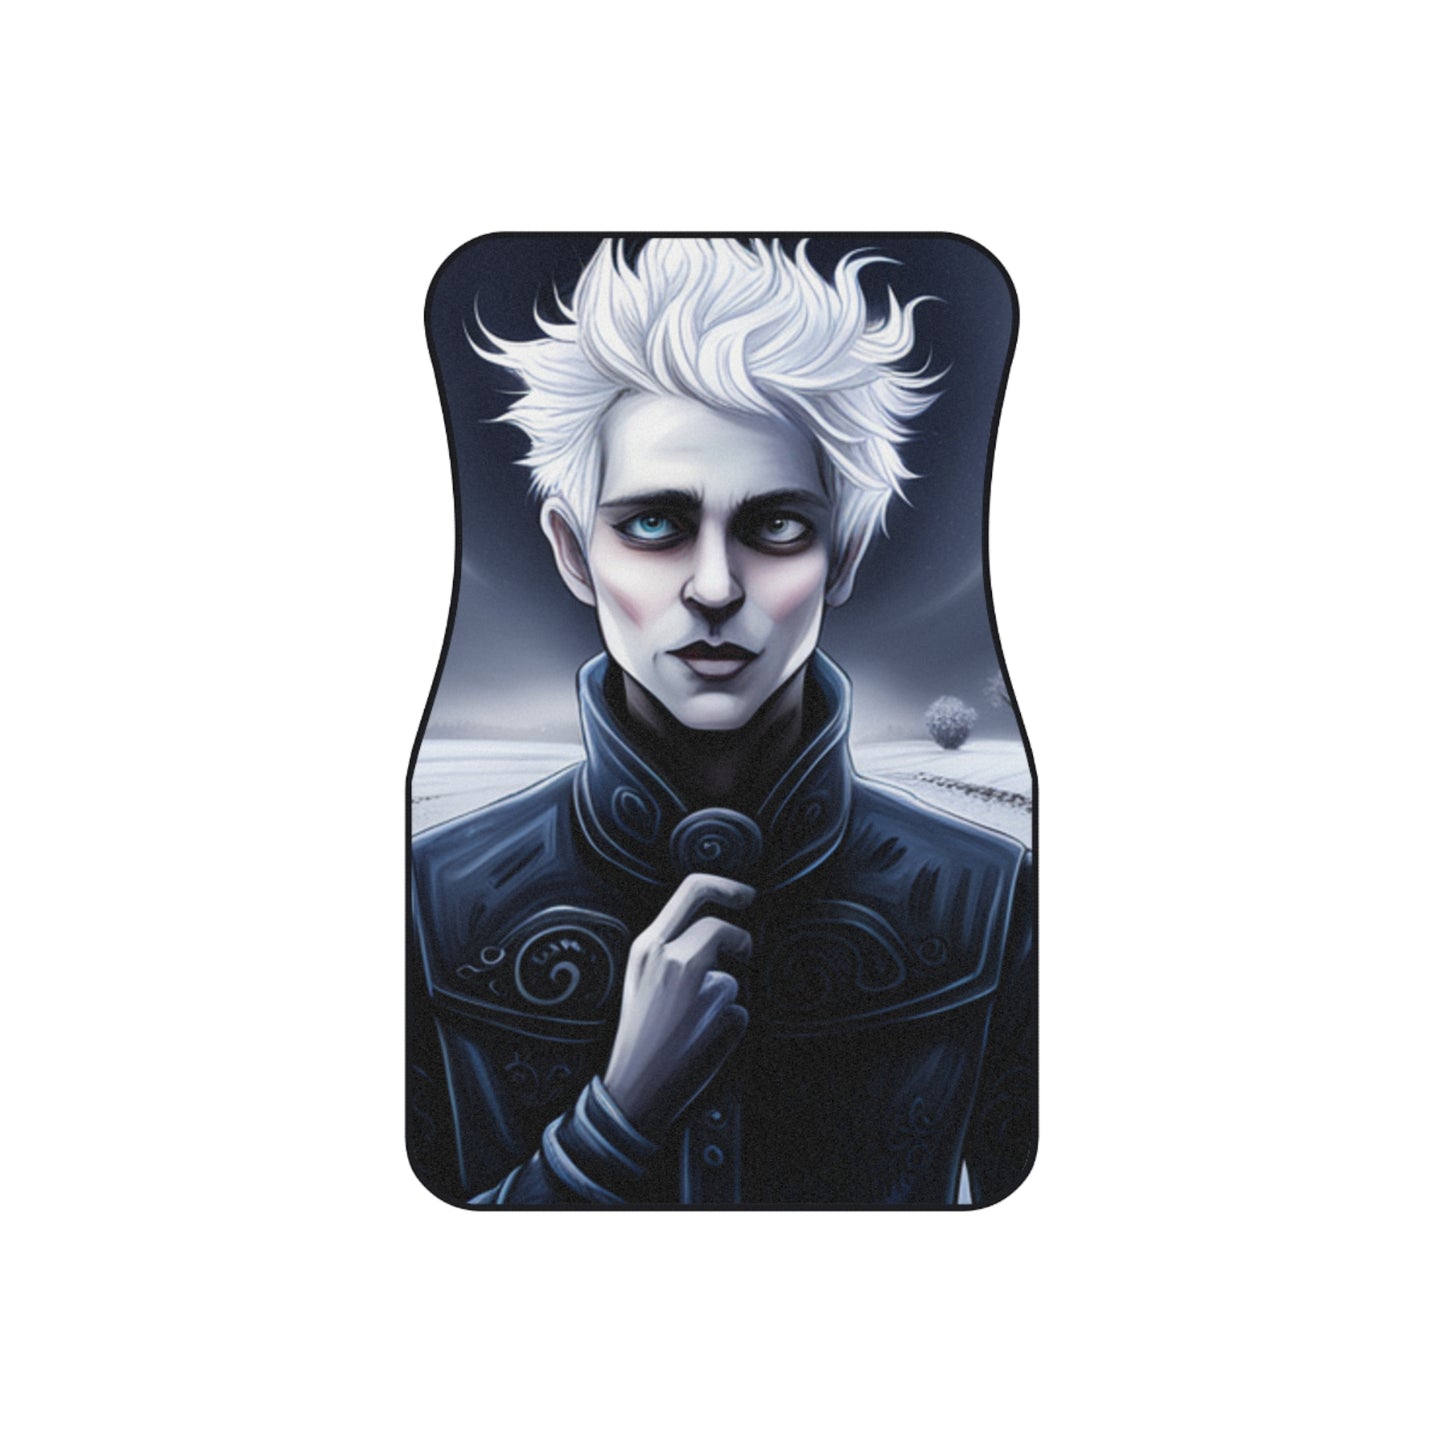 Gothic Jack Frost Car Mats (Set of 4)